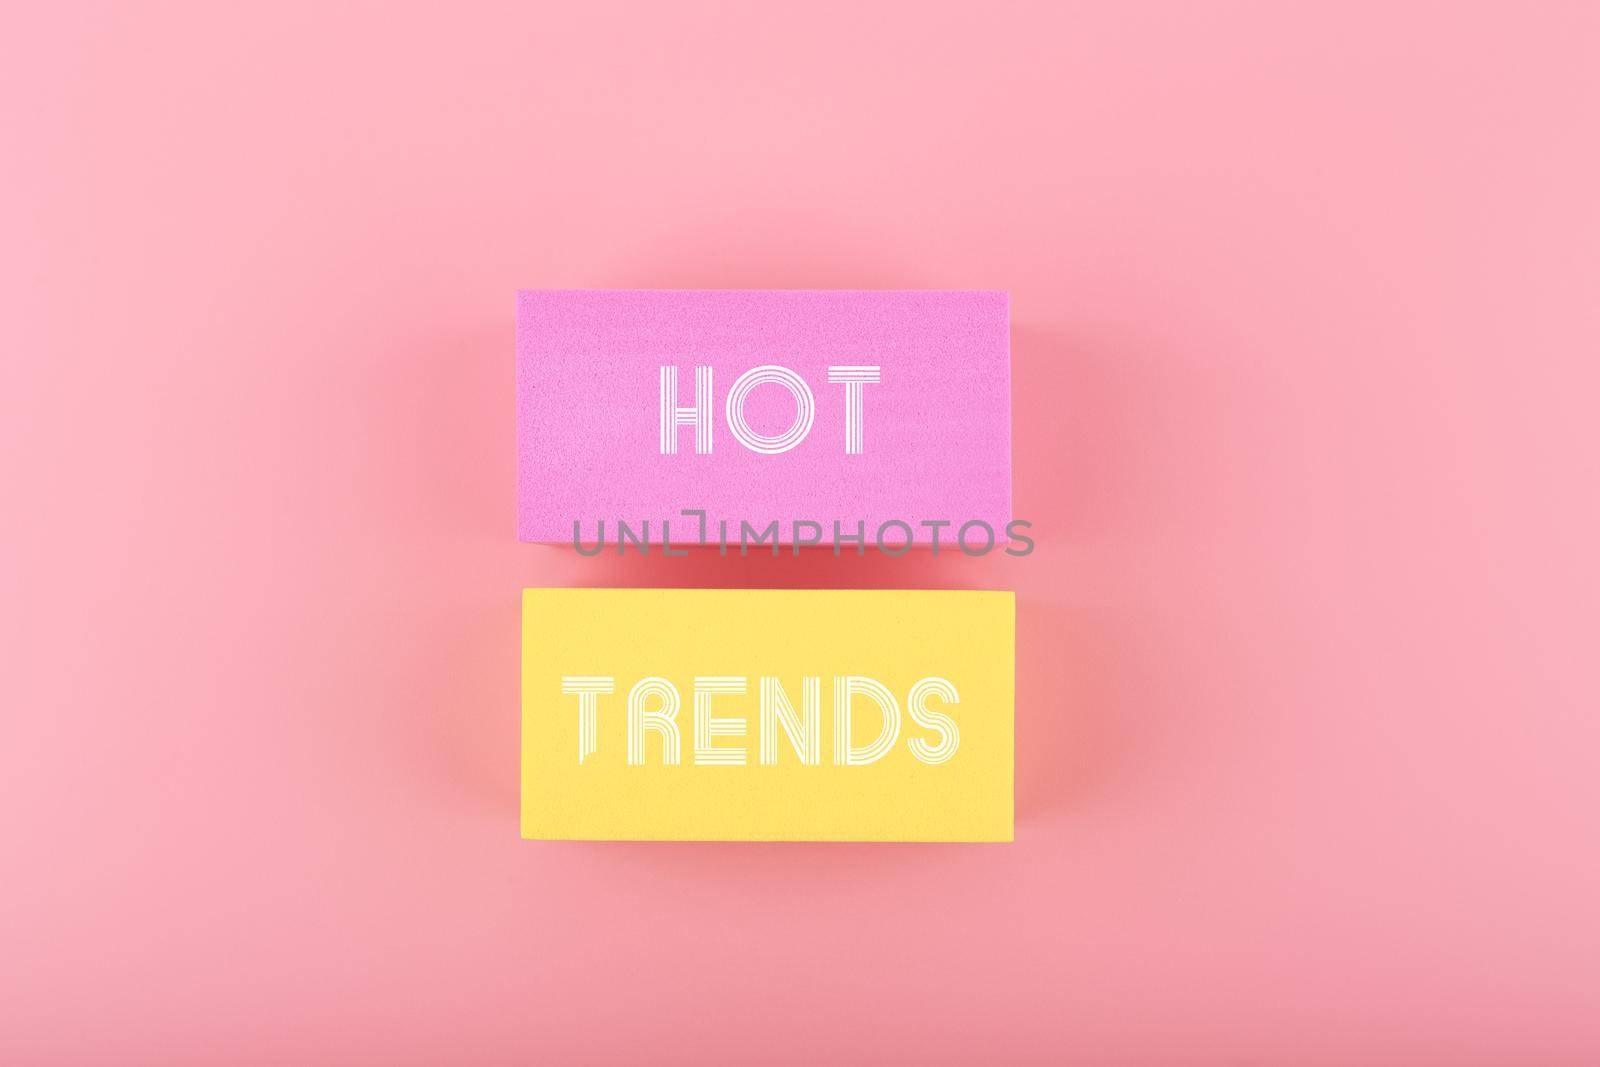 Hot trends written on colorful rectangles on light pink background by Senorina_Irina